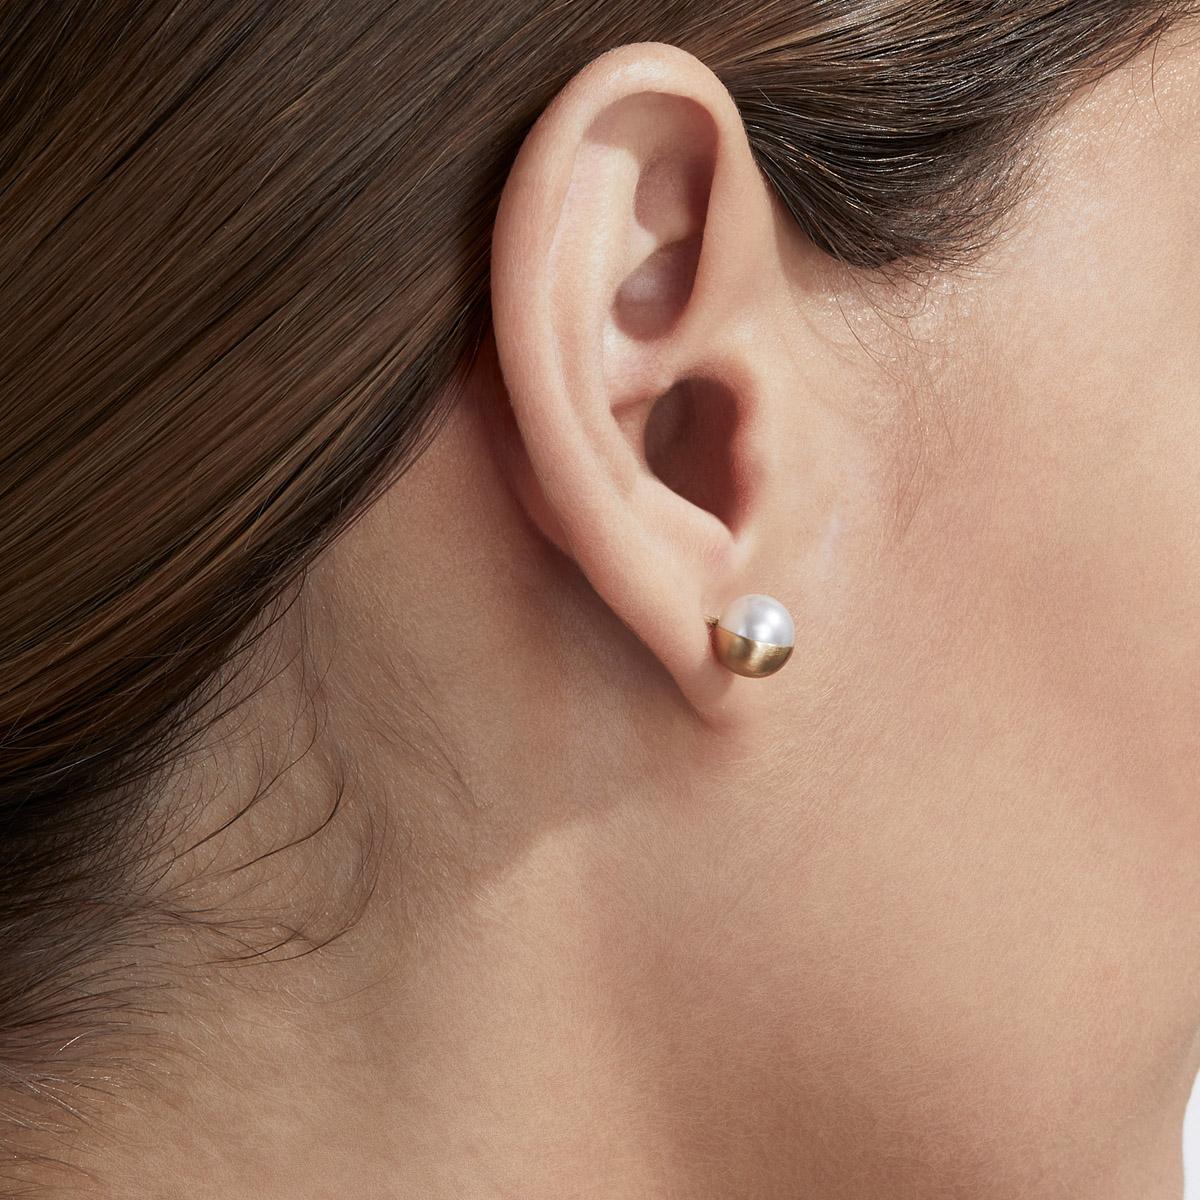 Akoya pearls are encased in a half sphere of gold at 90 and 135 degree angles and placed on a post. Each comes with an 18 karat yellow gold earring back. 

Post length: 11mm
Earring back length: 7mm
Akoya pearl: 7mm
This item is sold as a pair.
This